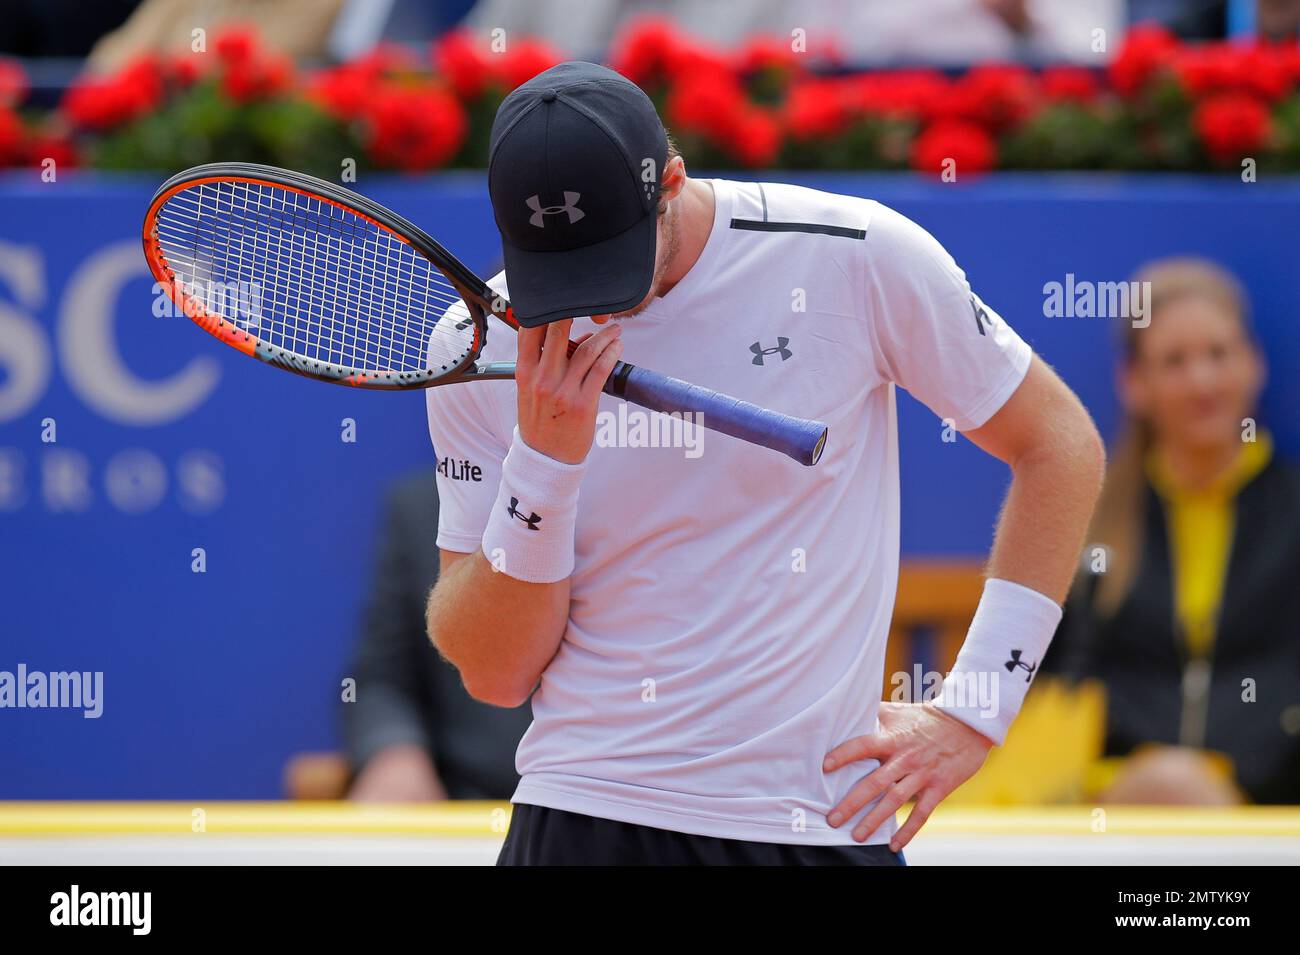 Andy Murray of Britain reacts during his match against Dominic Thiem of Austria in a semifinal match at the Barcelona Open Tennis Tournament in Barcelona, Spain, Saturday, April 29, 2017